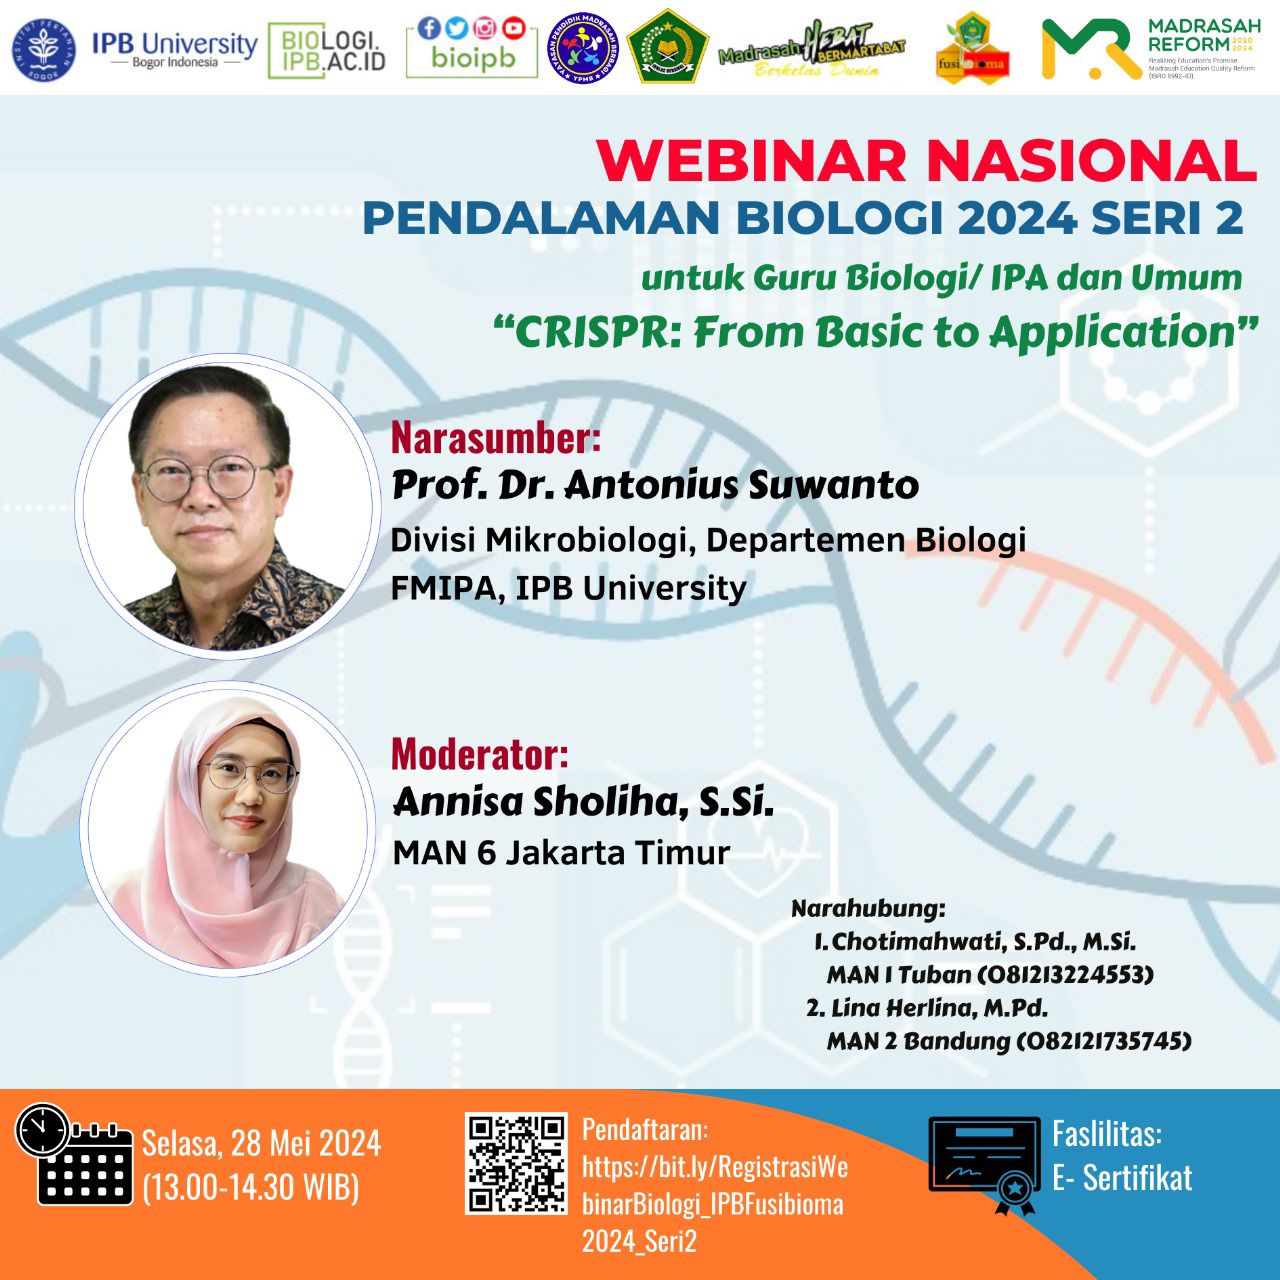 The 2nd National Webinar for Enriching Biological Concepts 2024